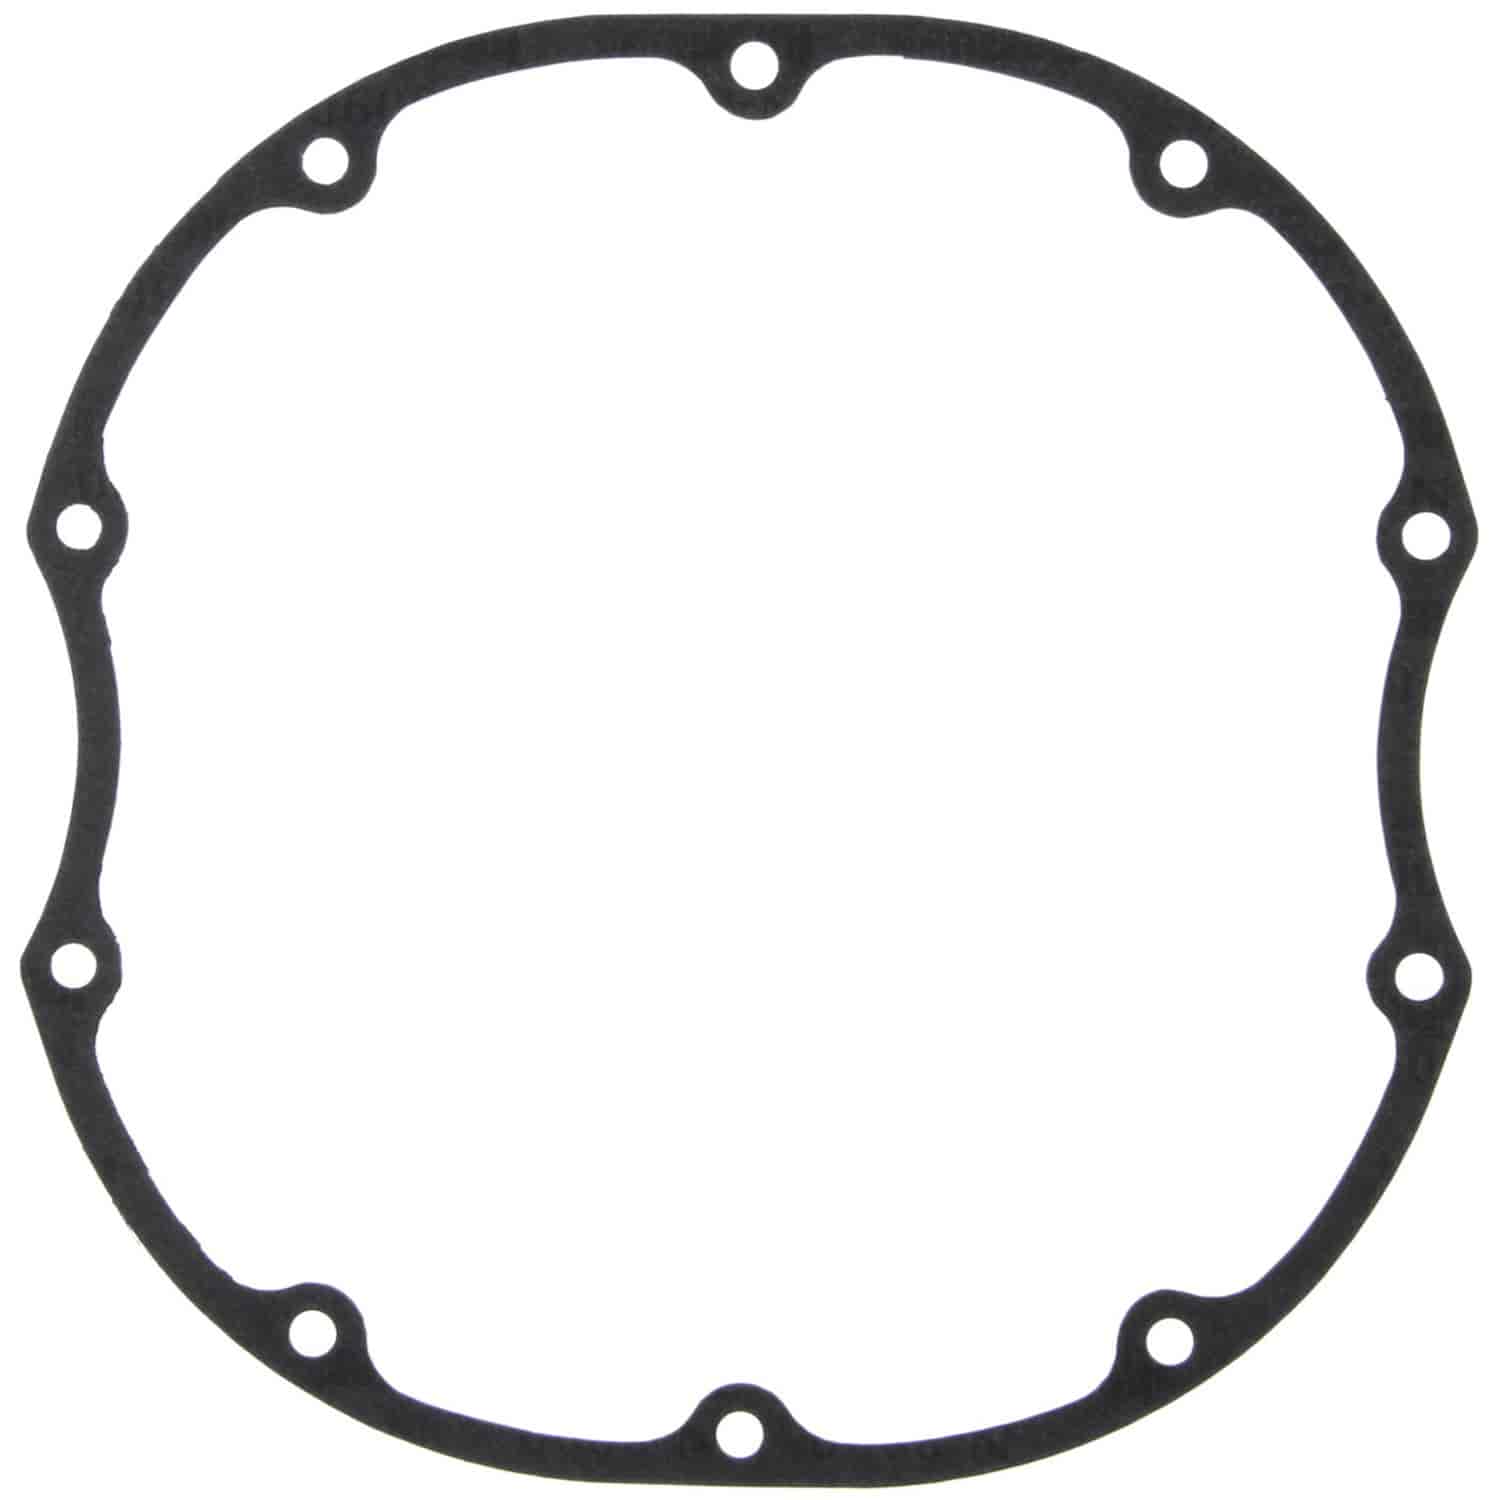 Axle Housing Cover Gasket Bui Cad Chev Olds Pont F85 64-84